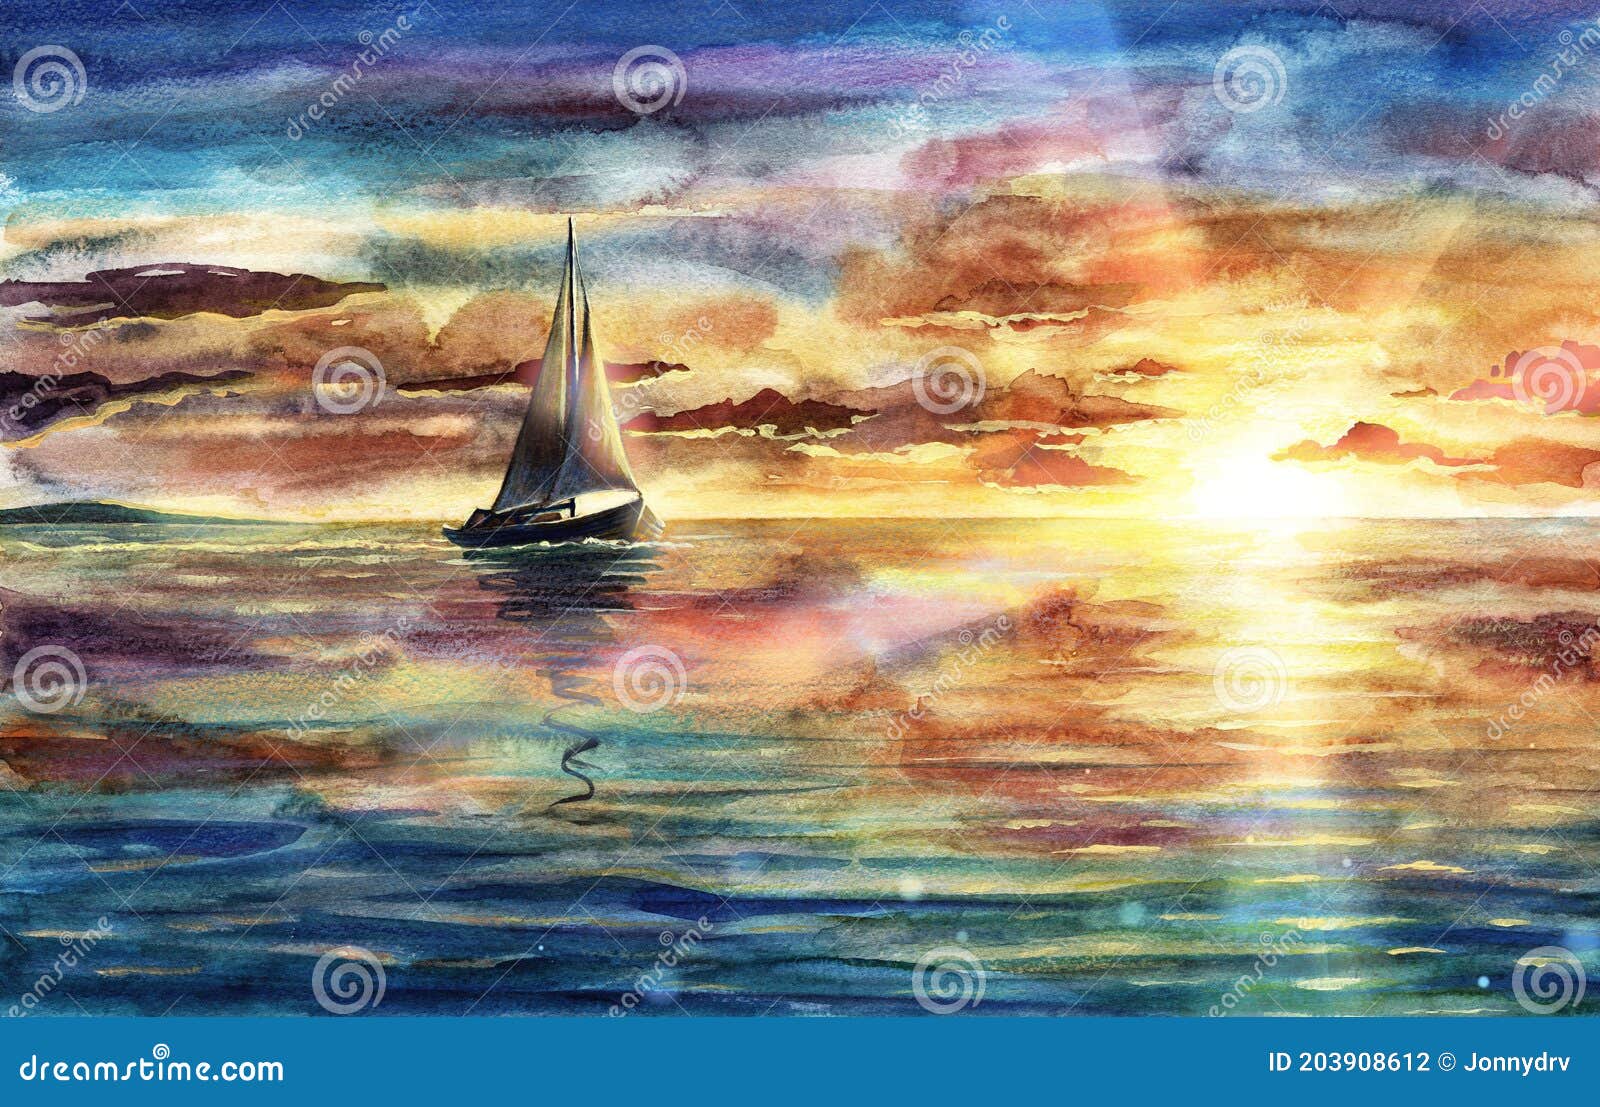 Beautiful Watercolor Sea Landscape Illustration With Sunset, Sky And Clouds, Ship, Vessel, Boat In Ocean, Water Reflections Art Stock Illustration - Illustration Of Sail, Sailboat: 203908612